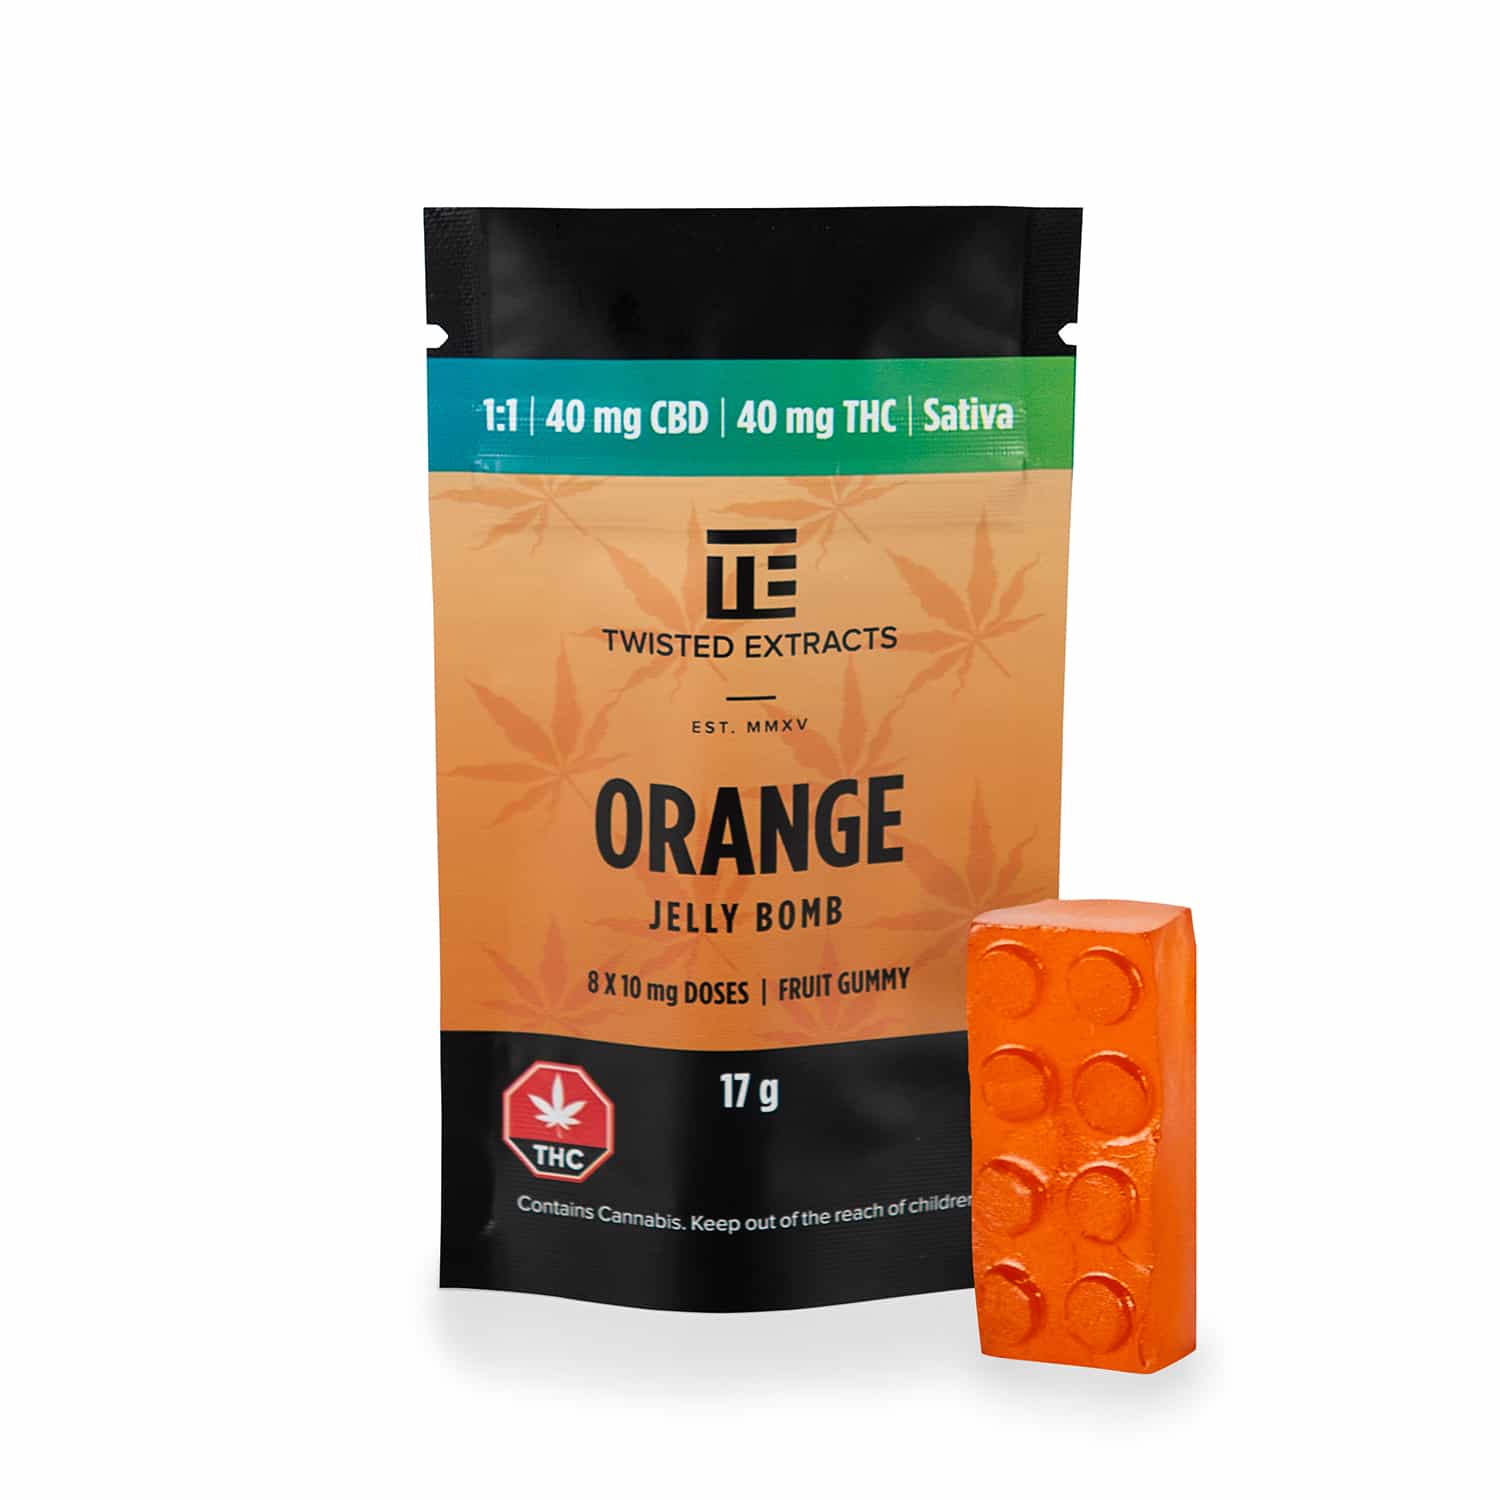 Twisted-extracts-orange-1to1-ganjawest-1.jpg